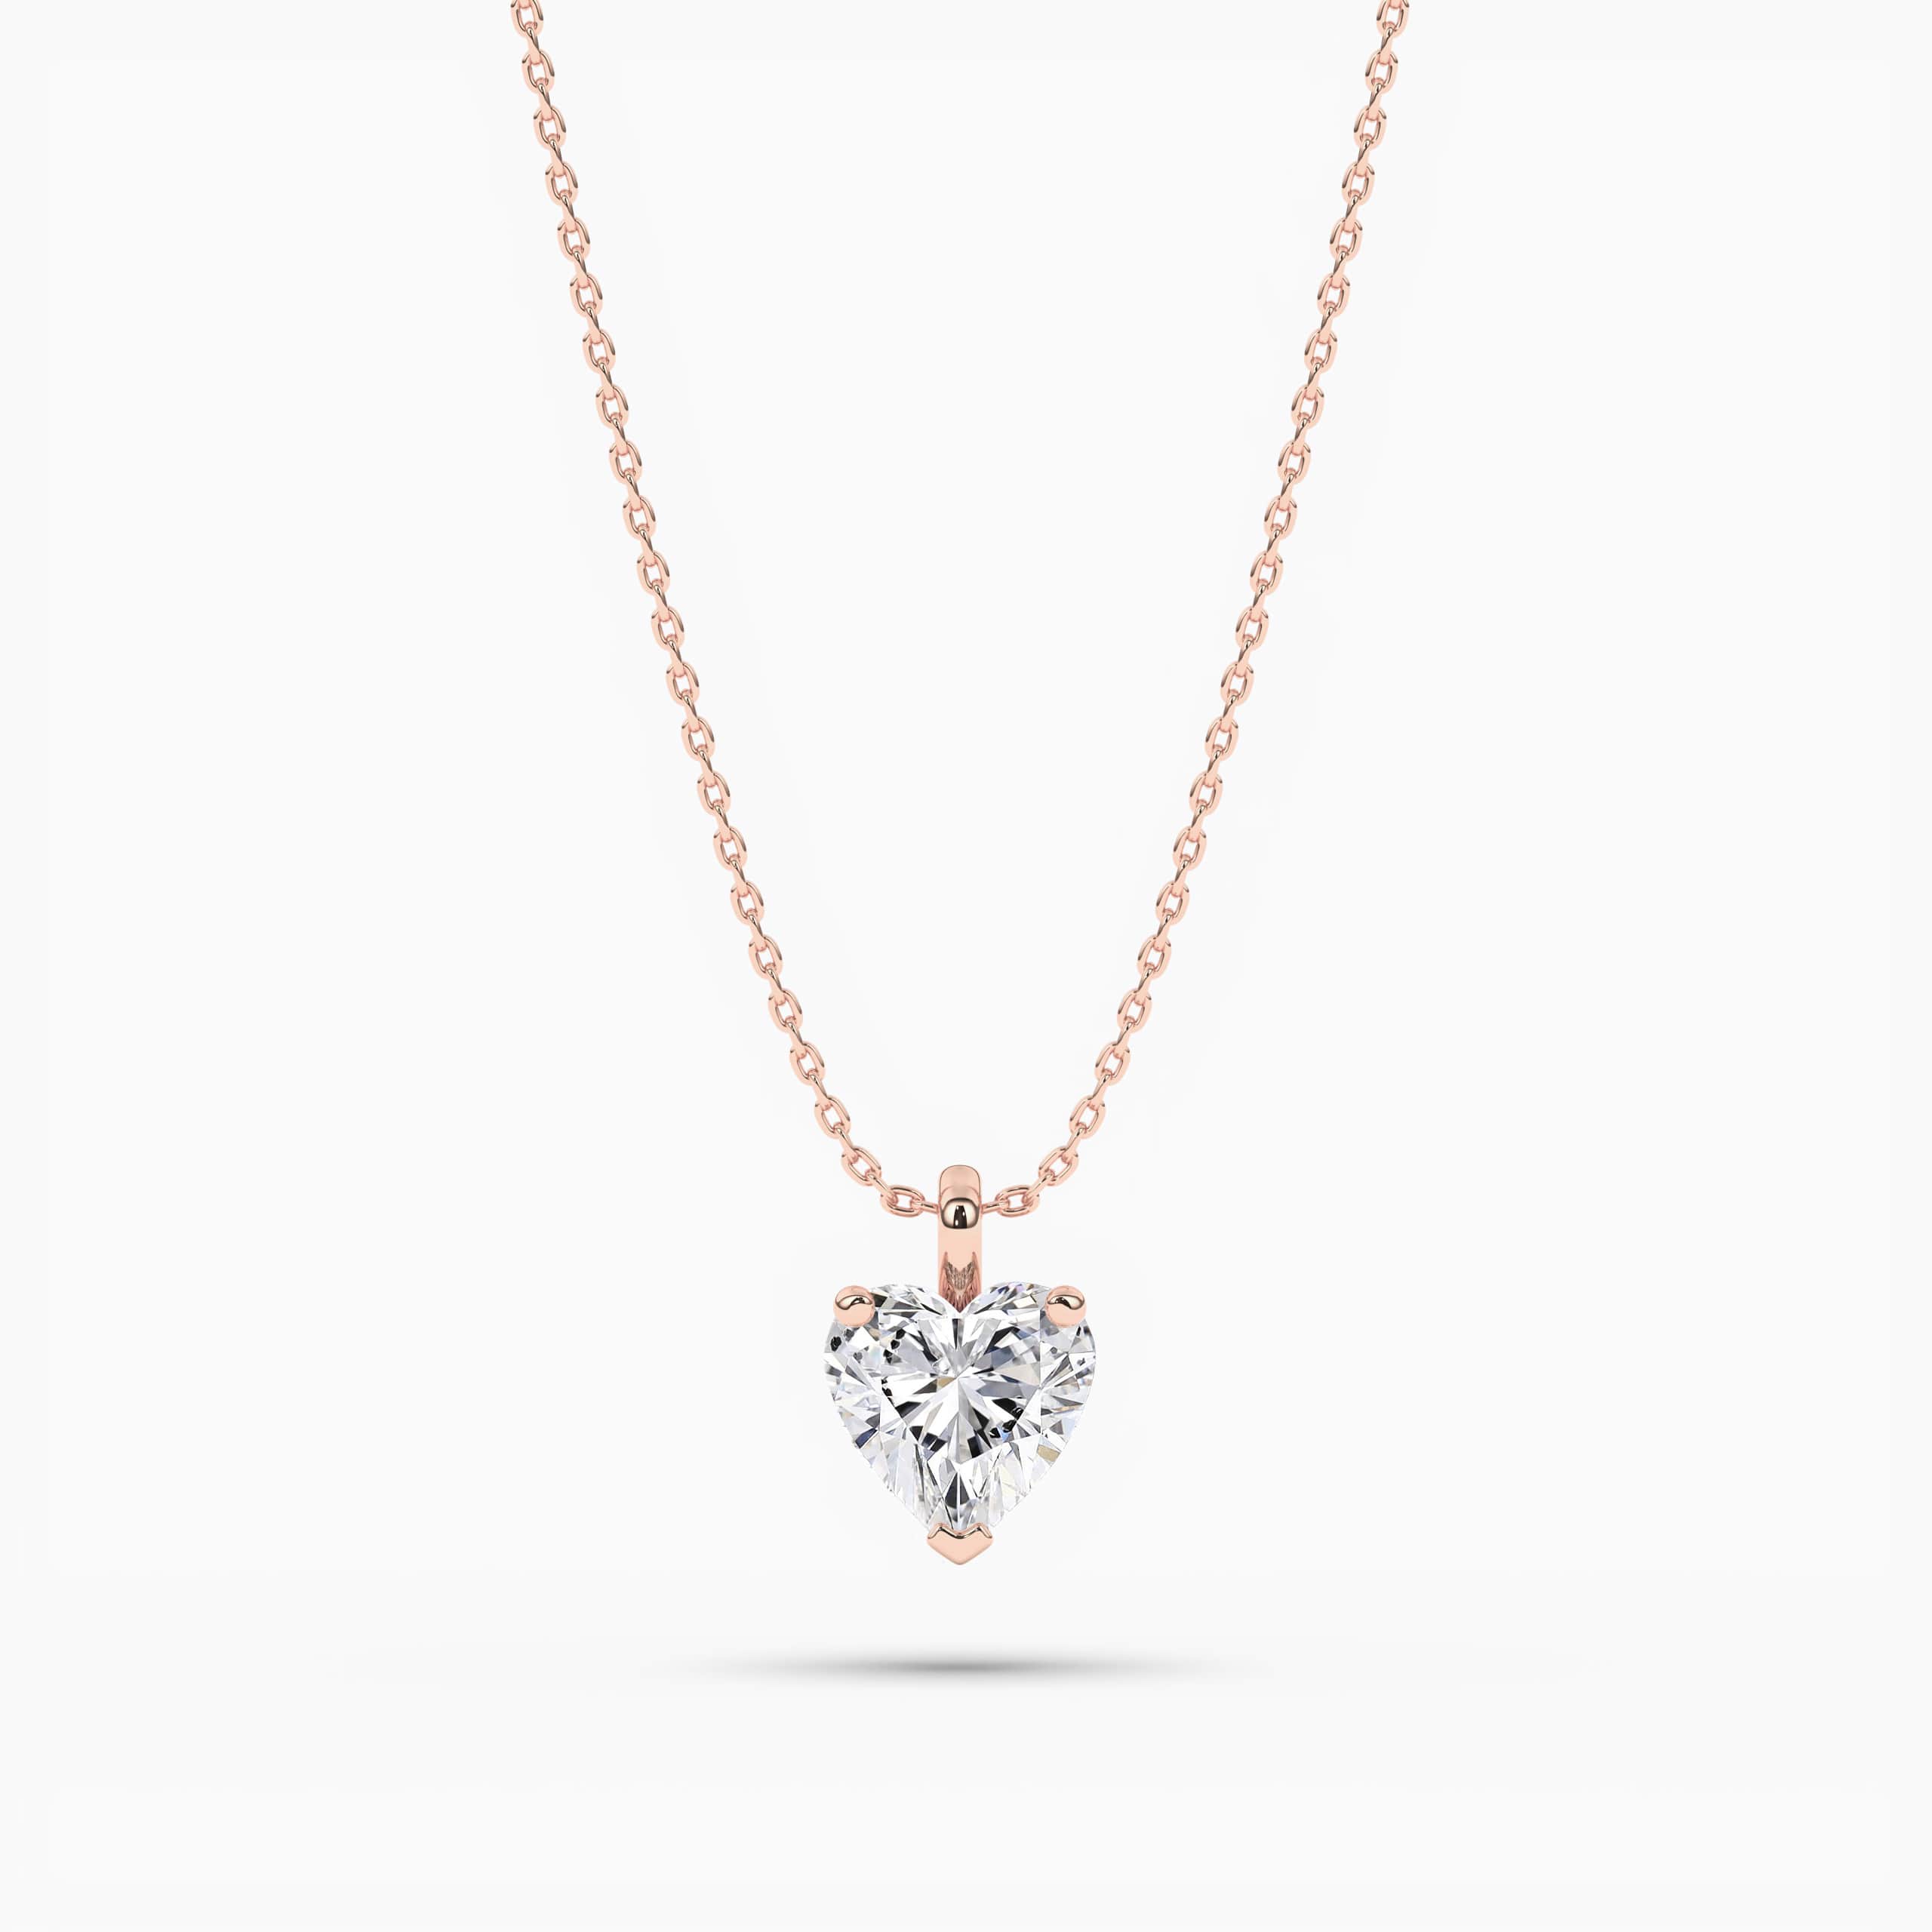 HEART-SHAPE SOLITAIRE PENDANT IN ROSE GOLD